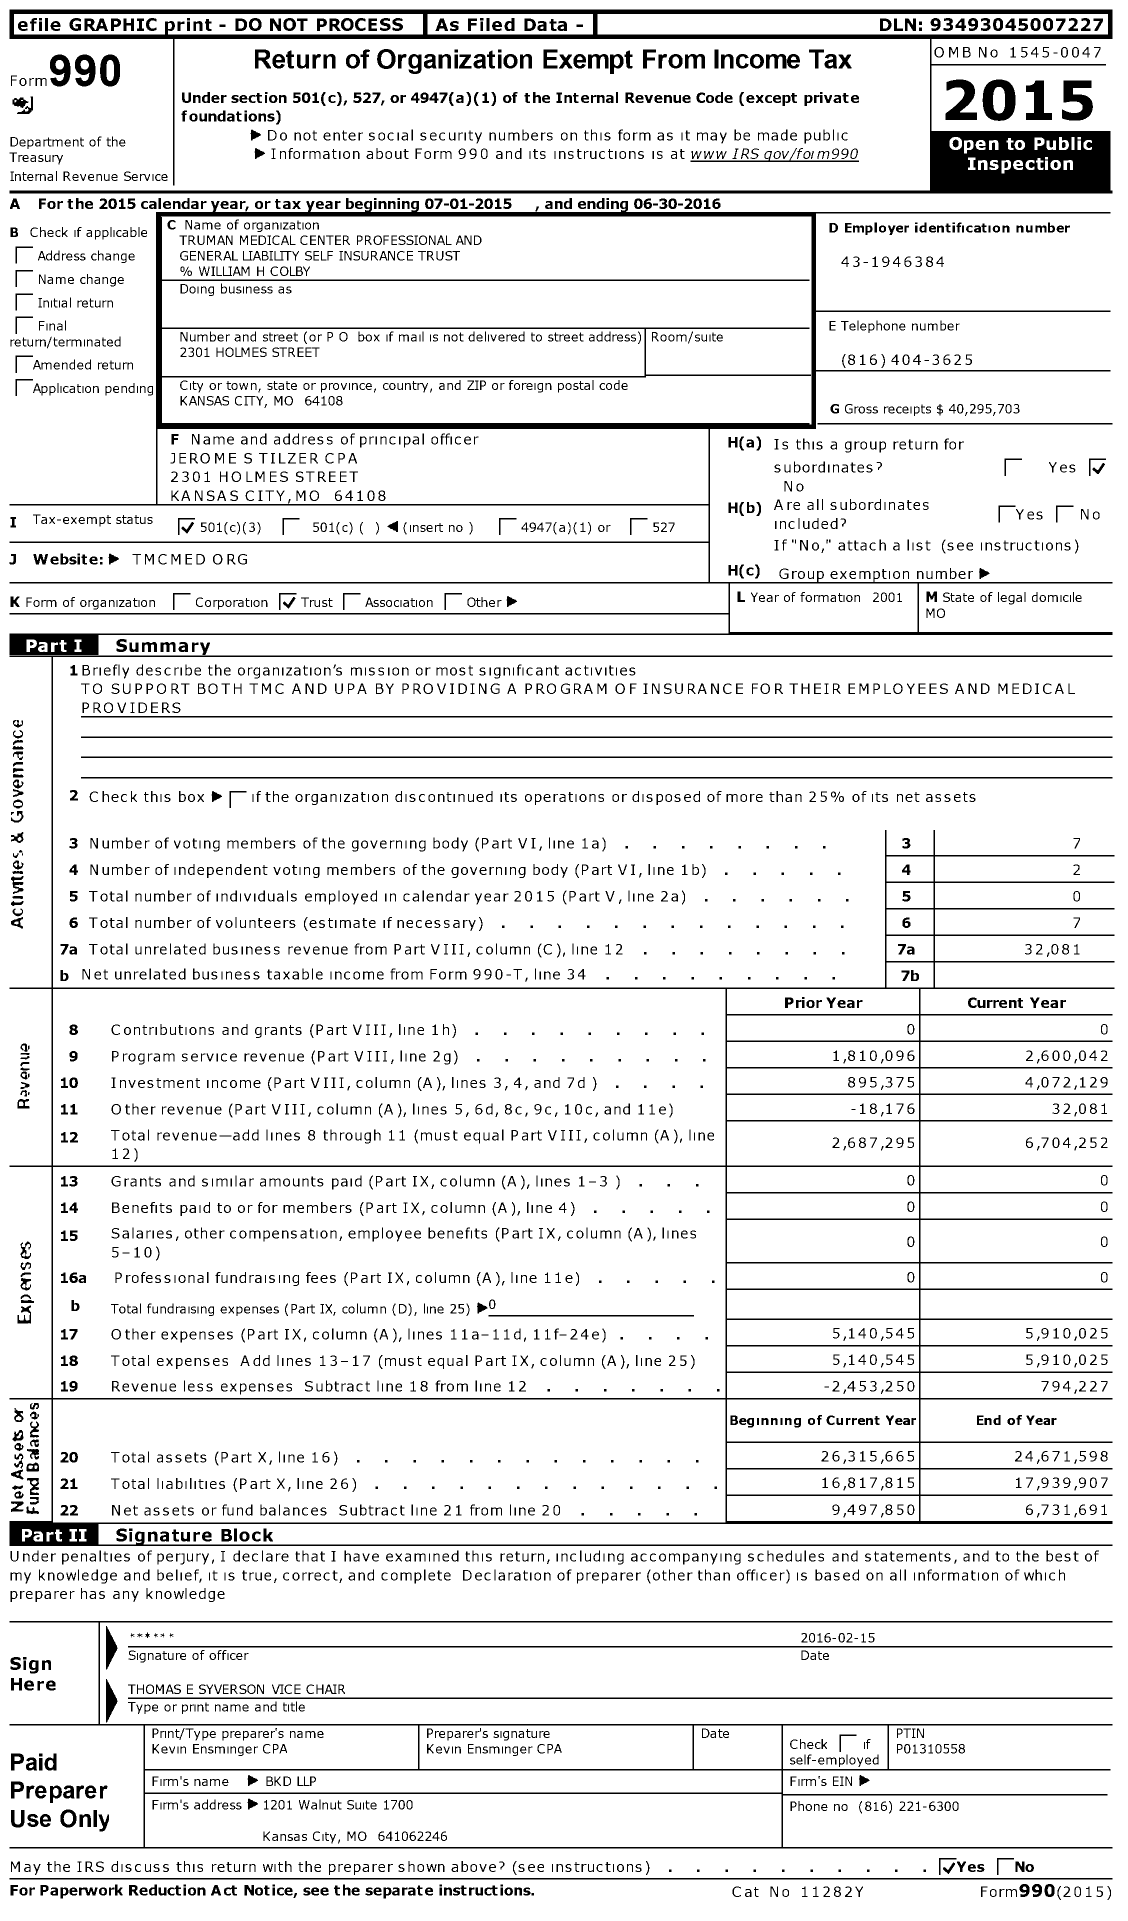 Image of first page of 2015 Form 990 for Truman Medical Center Professional and General Liability Self Insurance Trust